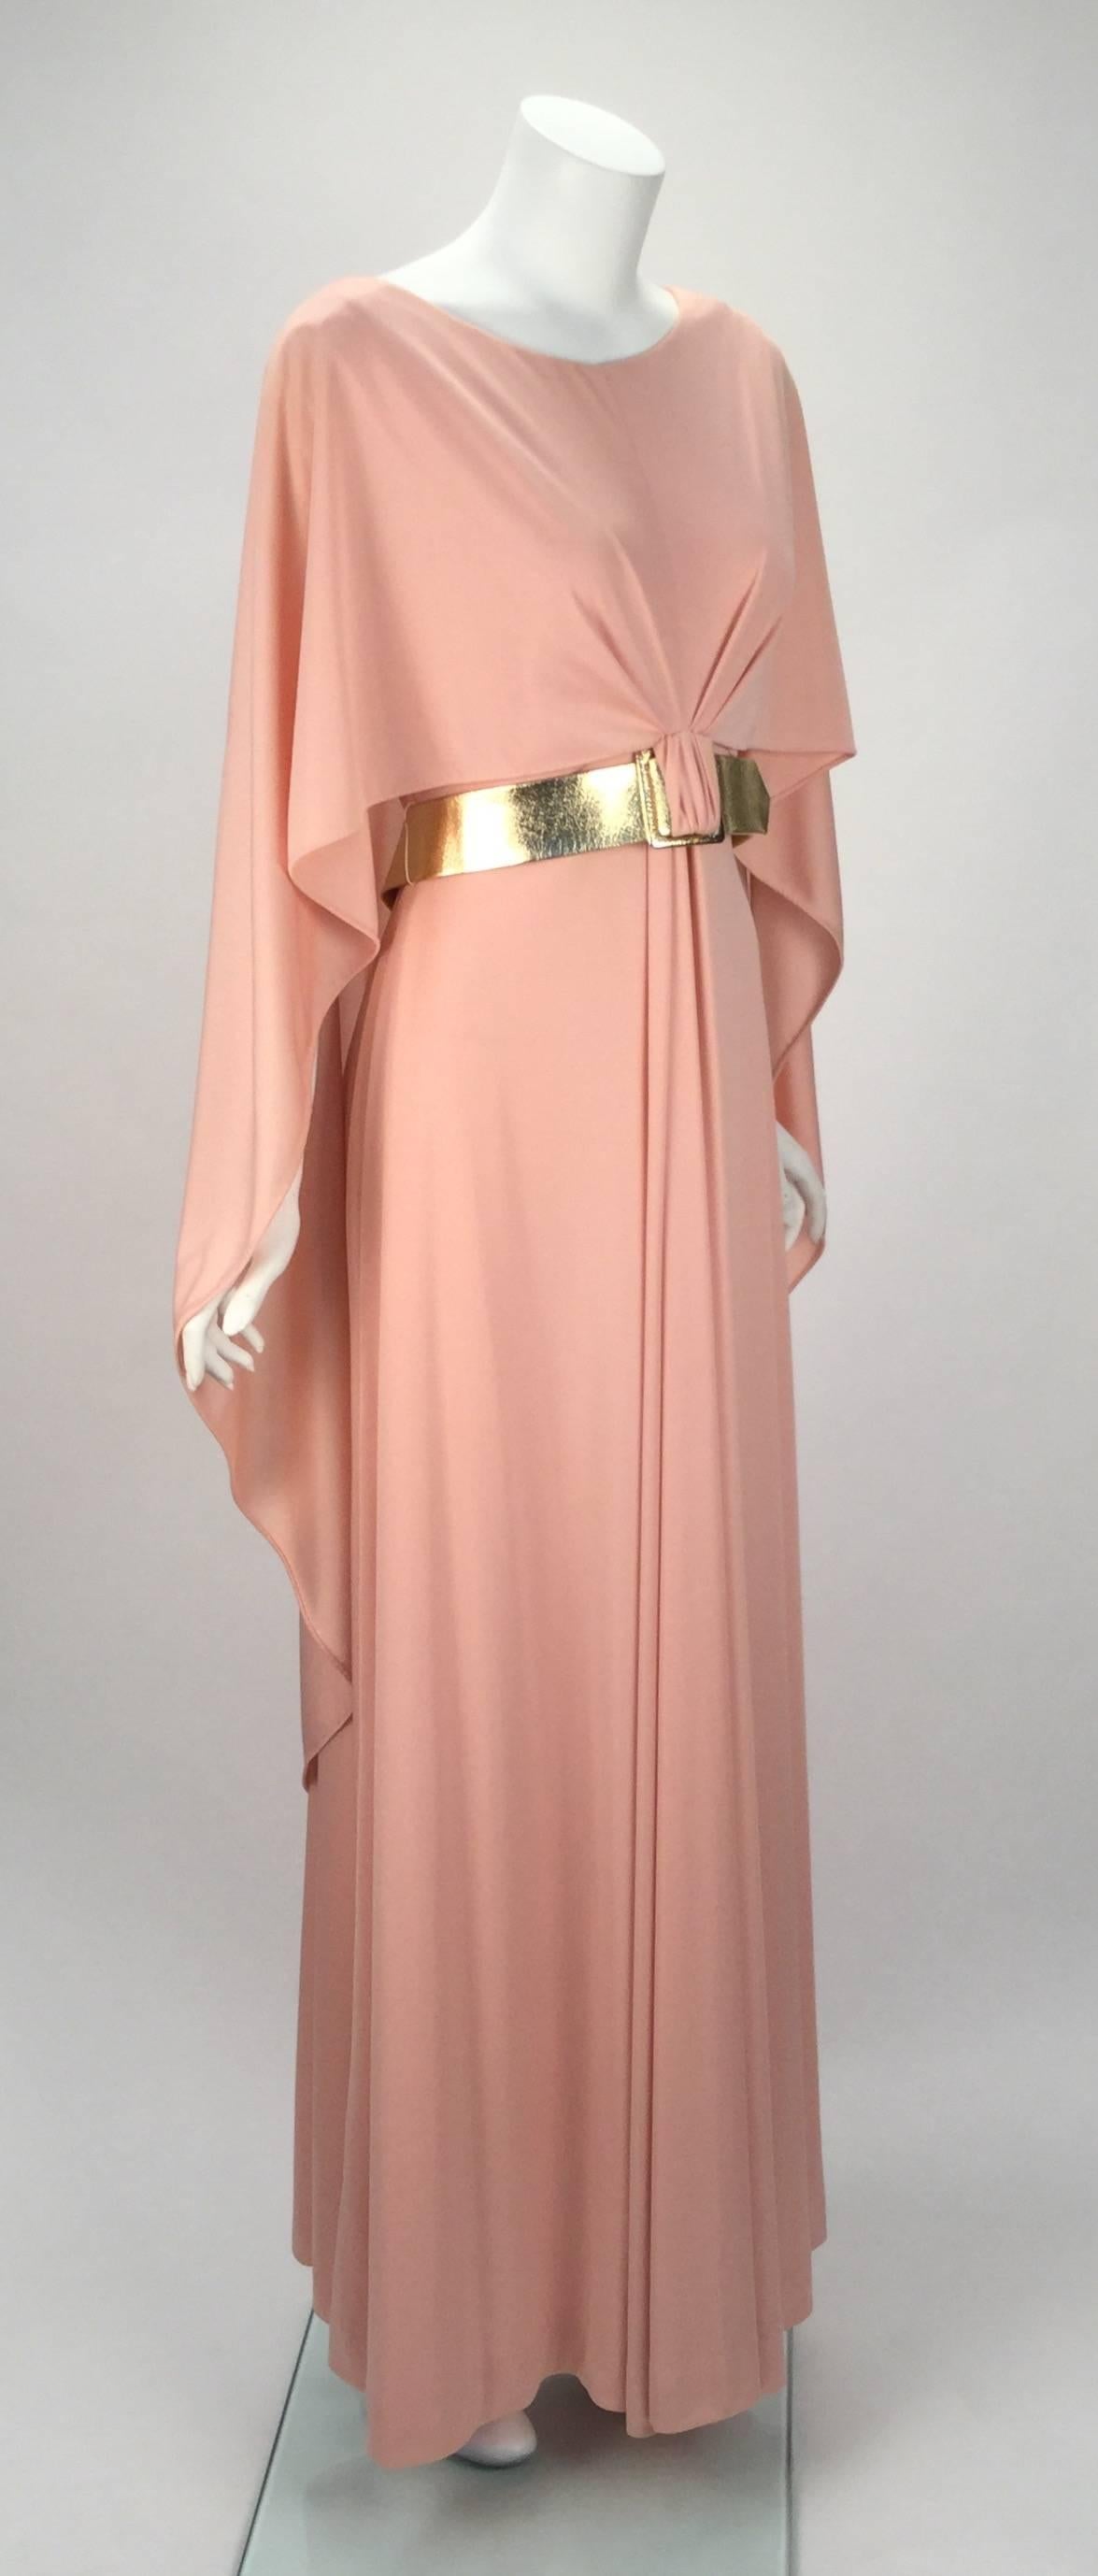 
Wonderful 1970s new with tags pale pink long knot wear evening dress from Estevez for his 